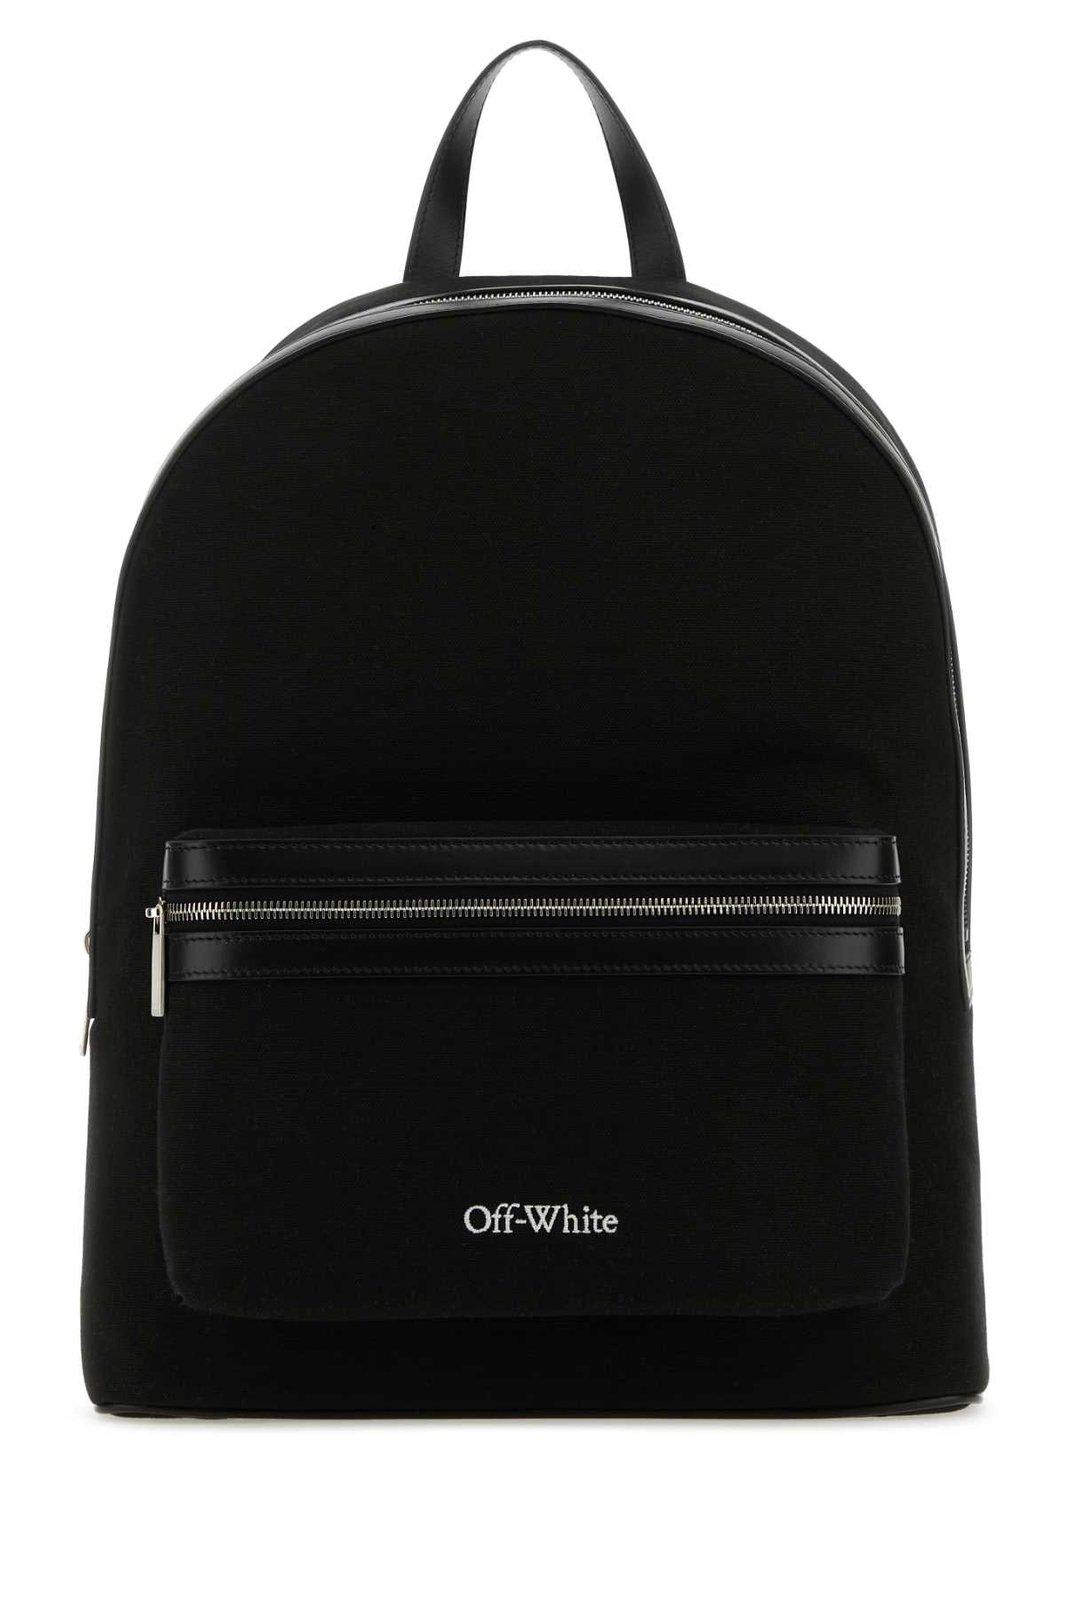 Off-White Logo Embroidered Zipped Backpack